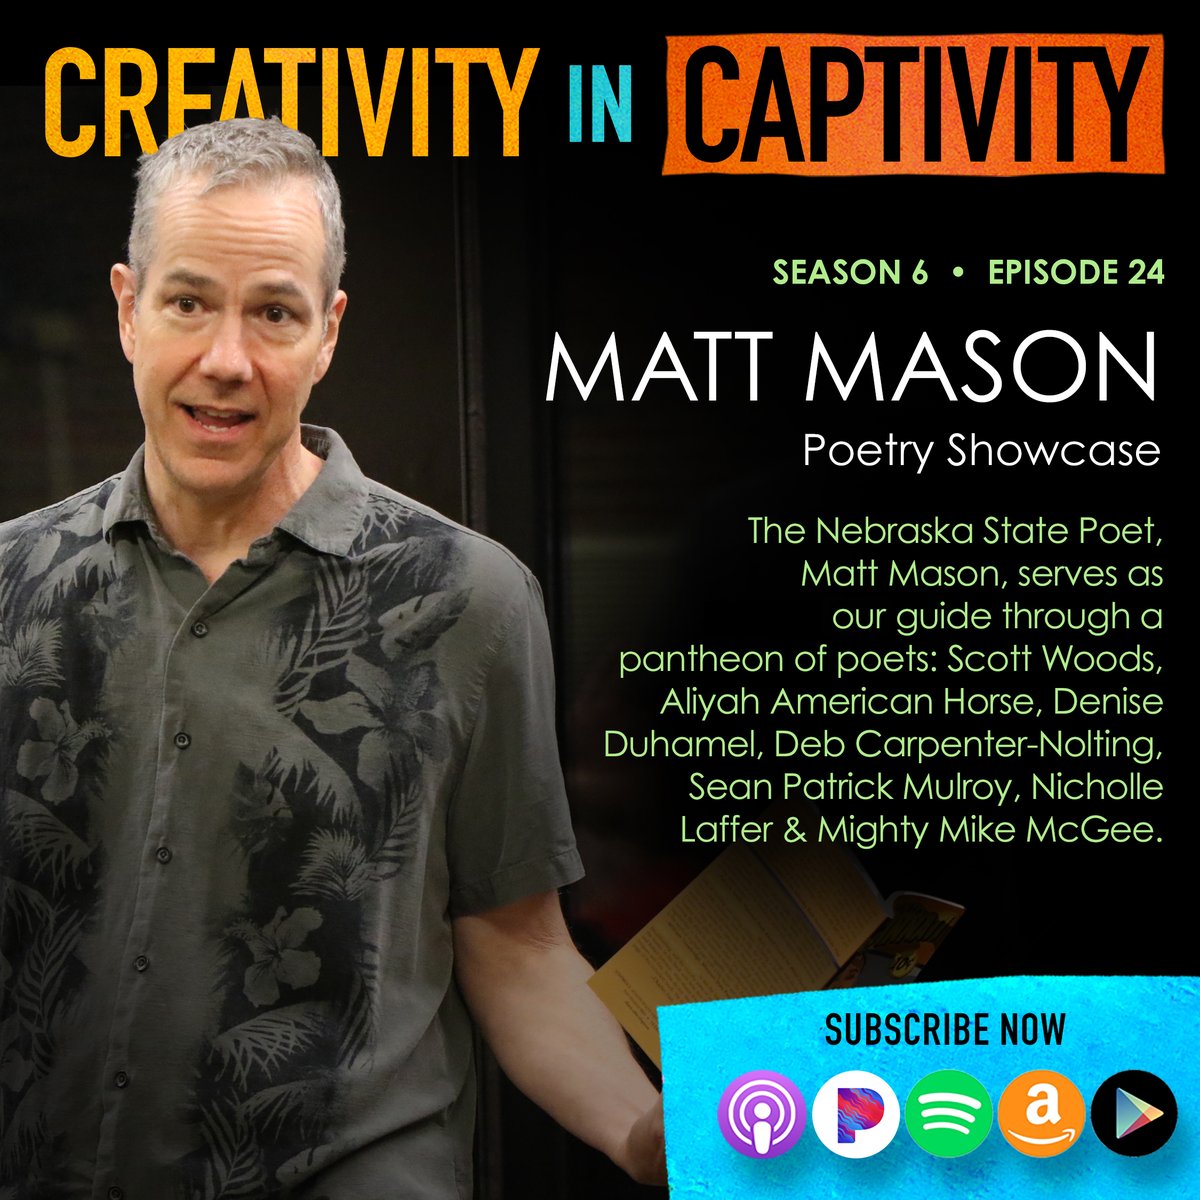 Catch an all new episode of @creativityincap with Nebraska State Poet, @mattmason, a tour guide through a pantheon of poets: Scott Woods, Aliyah American Horse, Denise Duhamel, and more ☀️ with @pathazell link.chtbl.com/CIC_MattMason